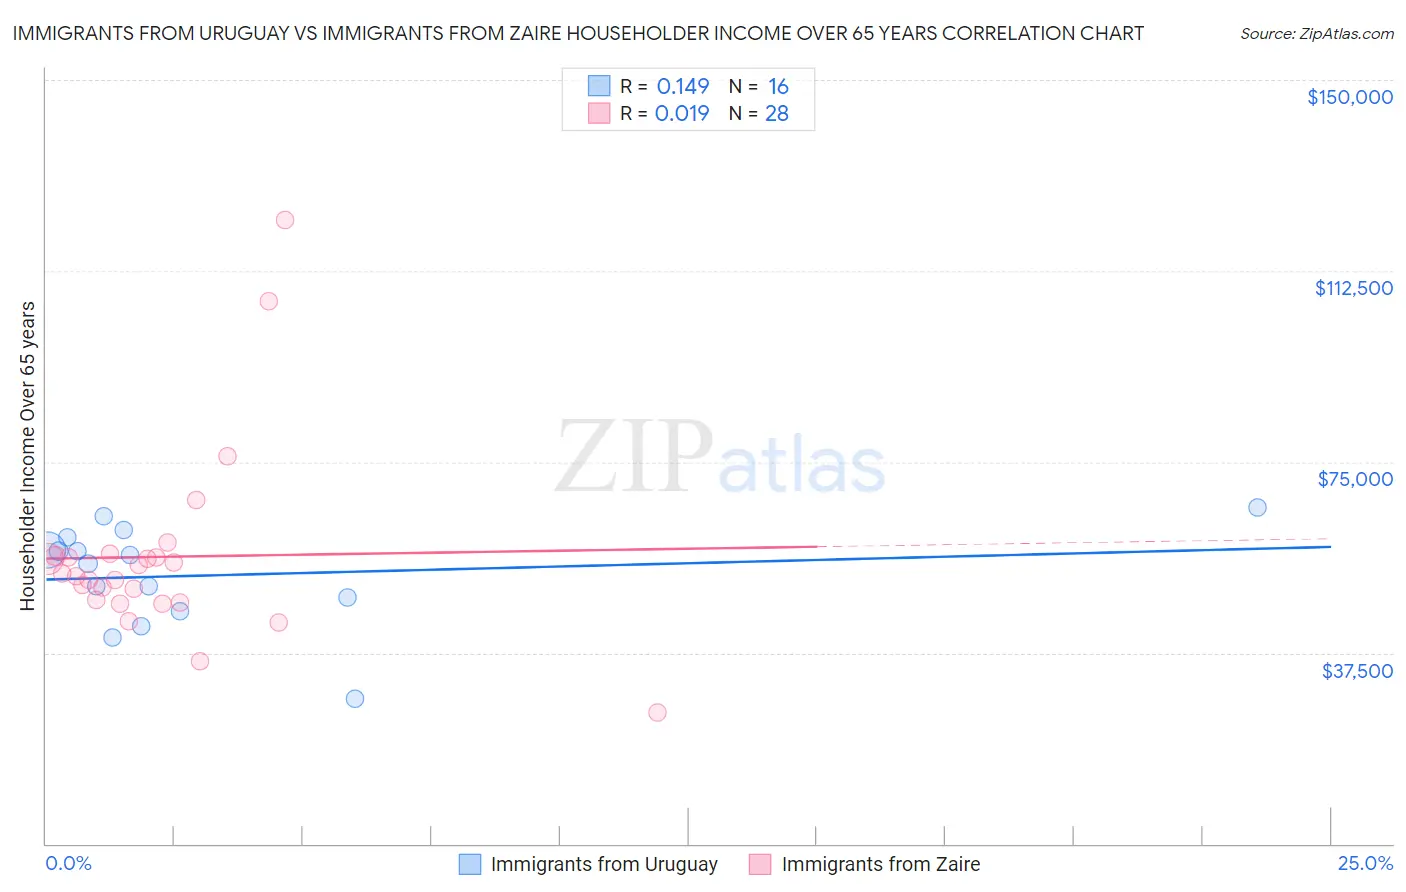 Immigrants from Uruguay vs Immigrants from Zaire Householder Income Over 65 years